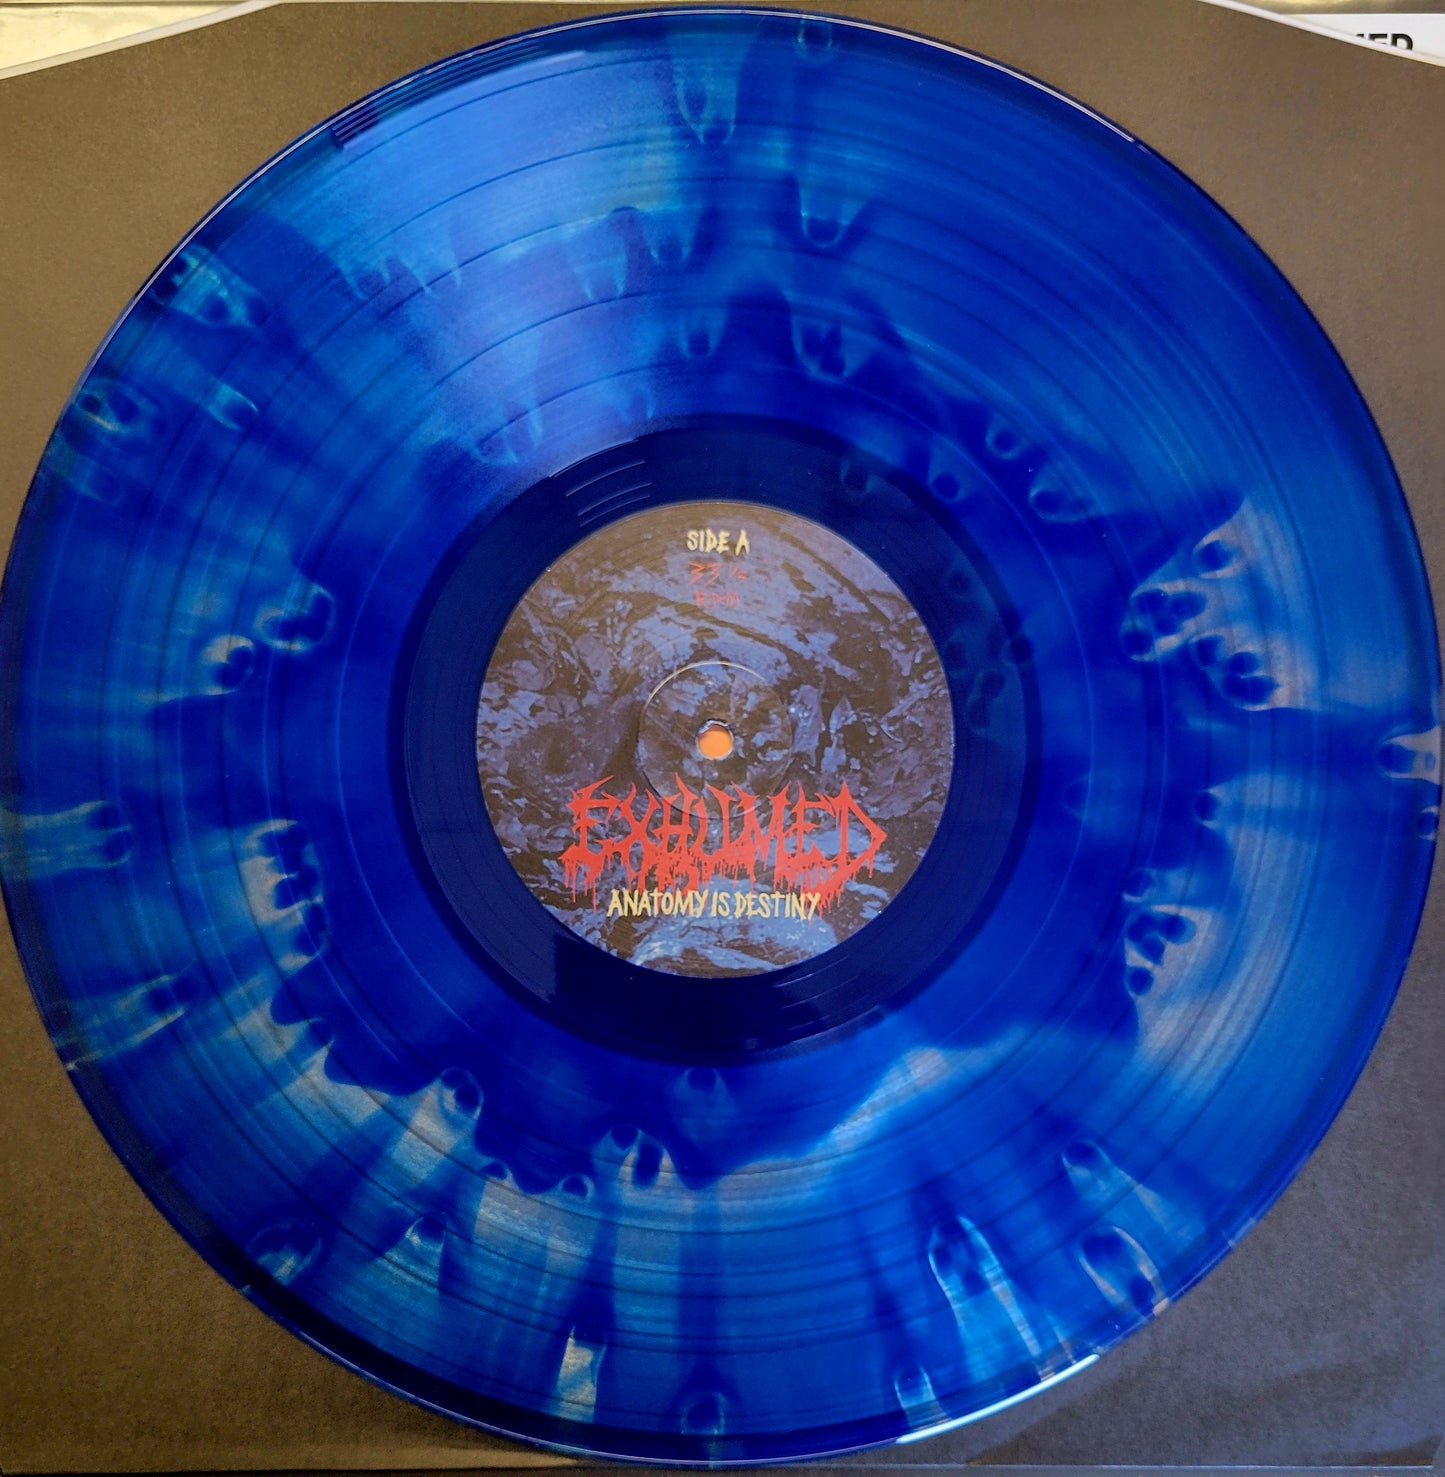 EXHUMED "Anatomy is Destiny" 12" LP - EXCLUSIVE Royal Blue Cloudy variant